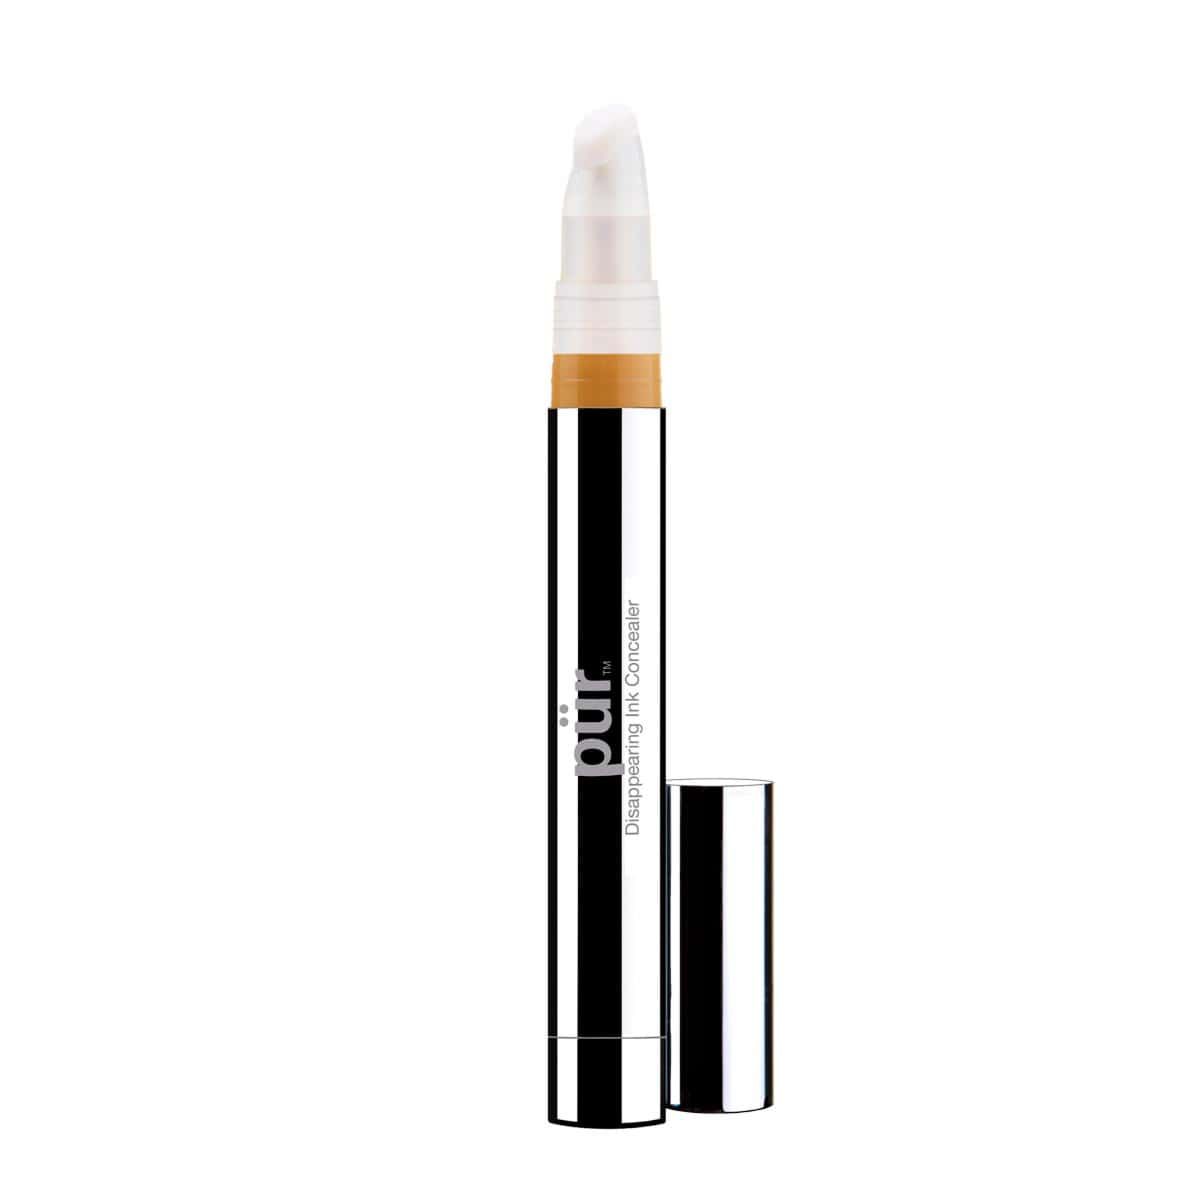 Disappearing Ink 4-in-1 Concealer Pen | PUR, COSMEDIX, and butter London